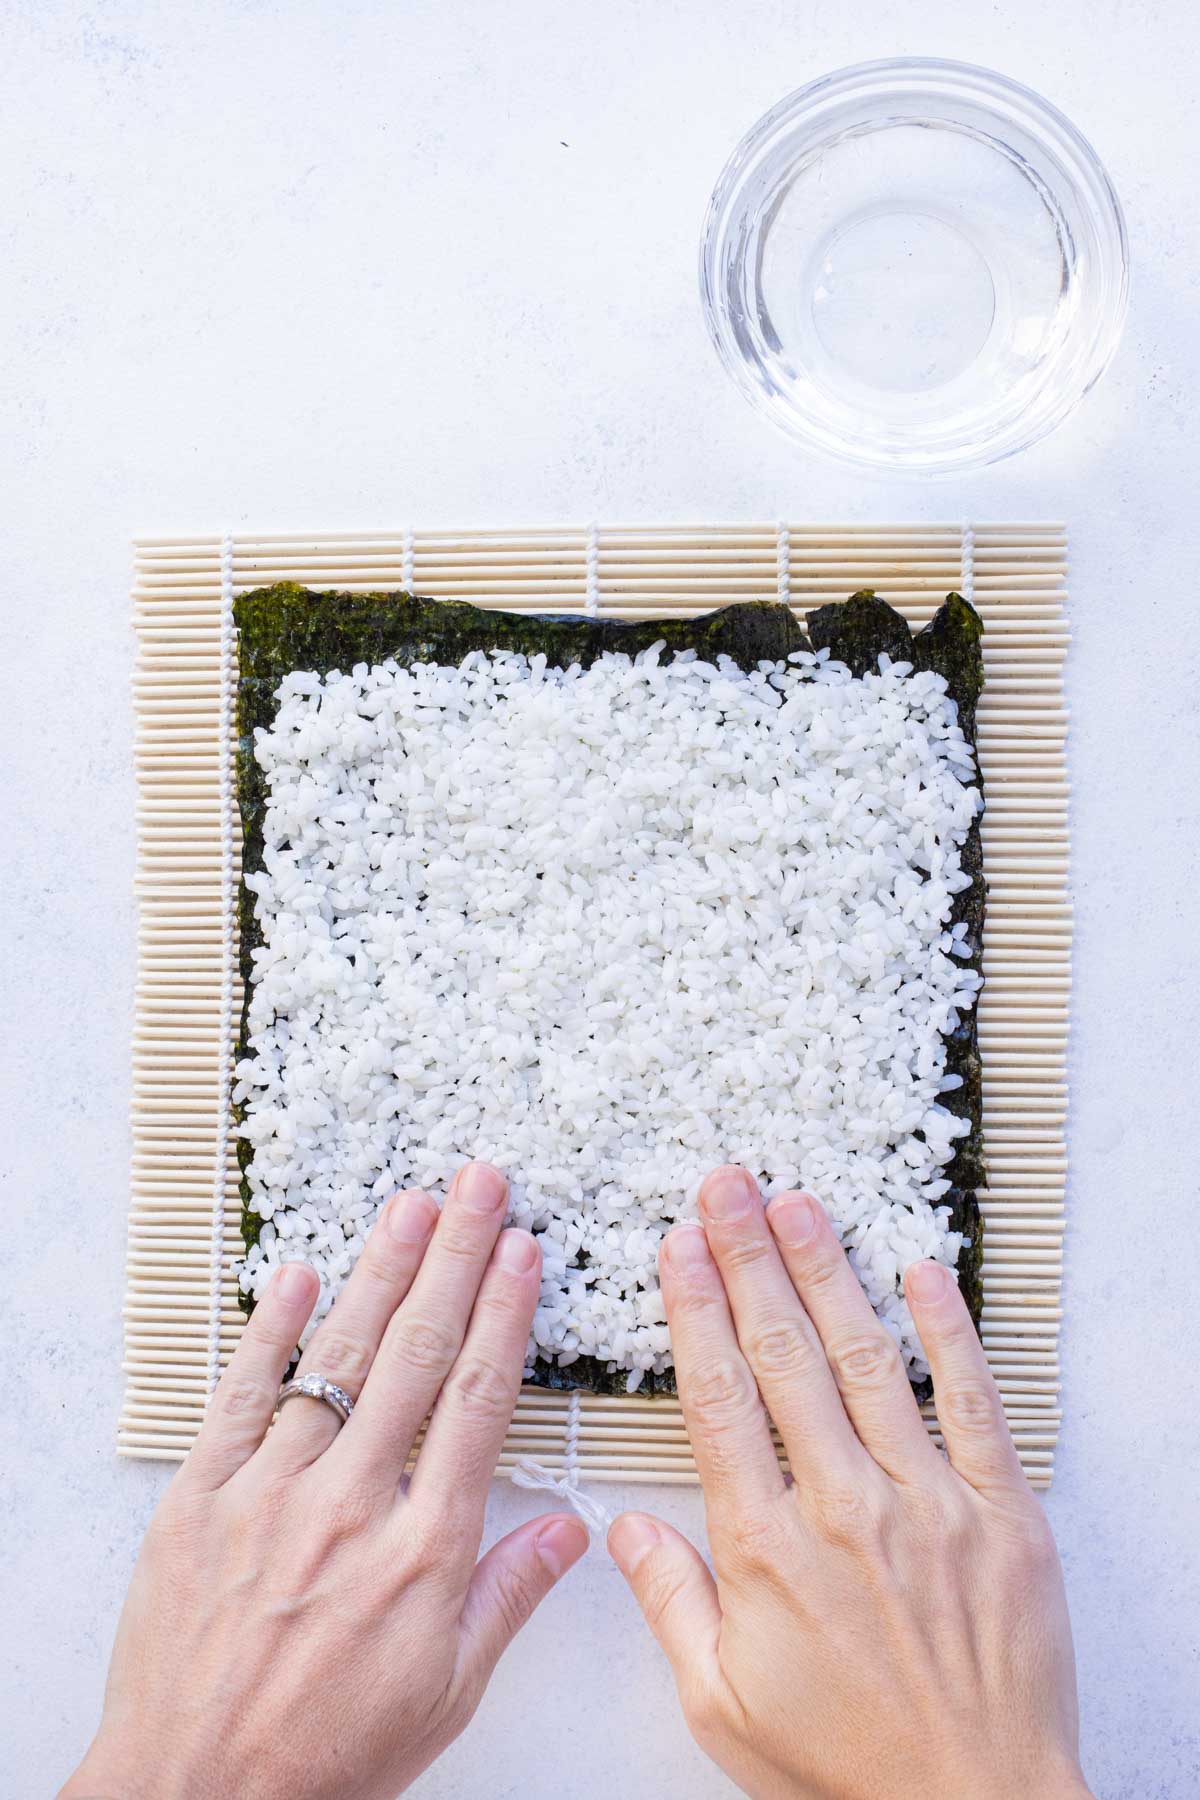 Fingers are wet before spreading the rest of rice evenly.